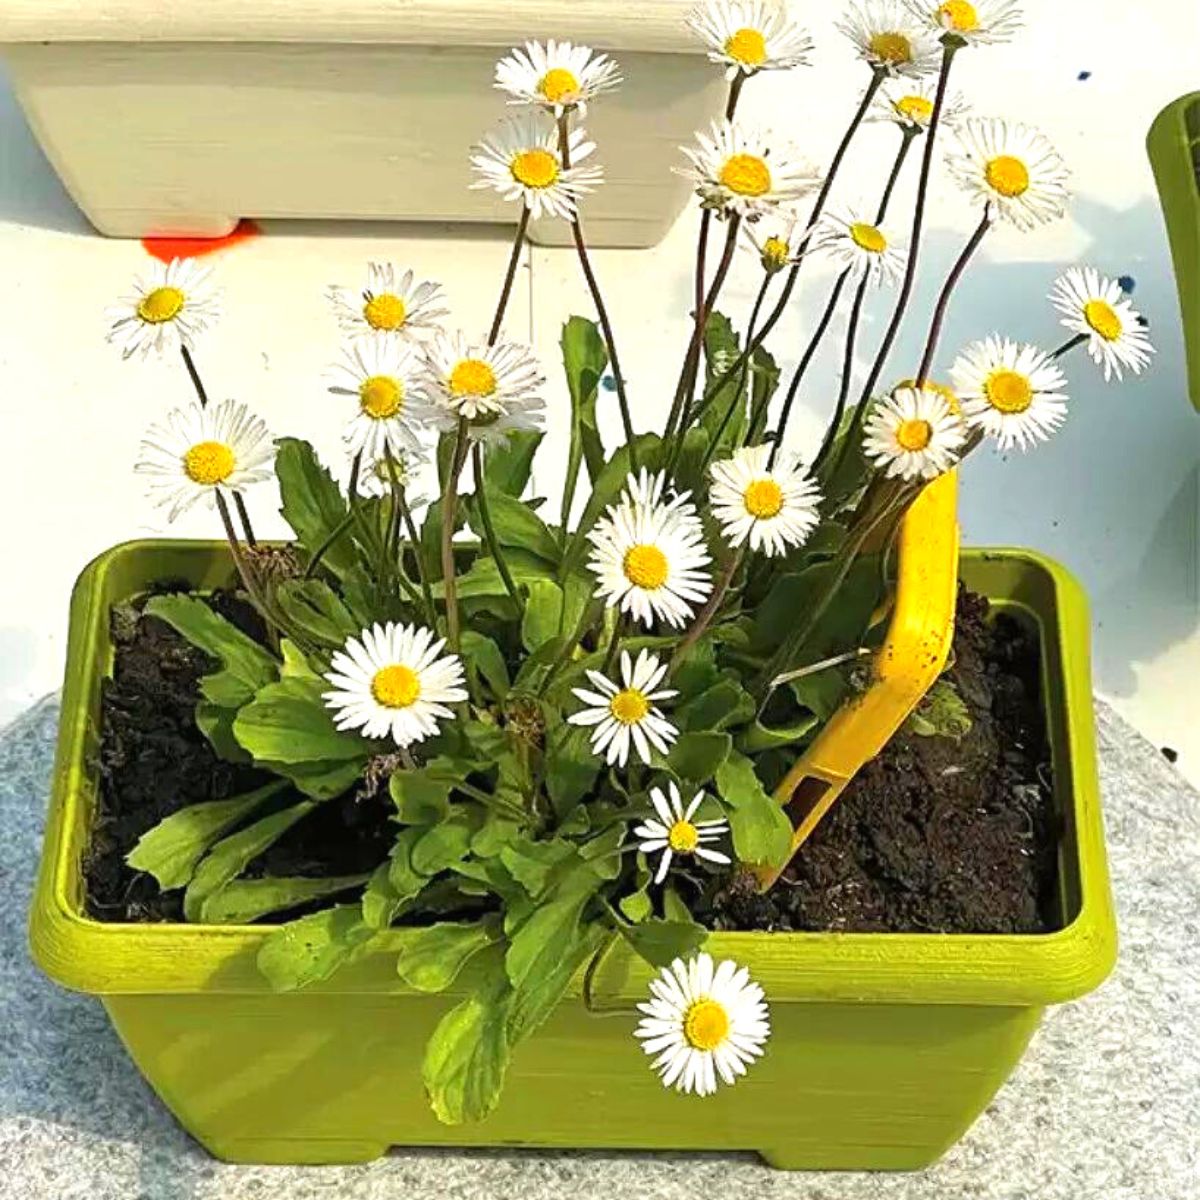 Daisies fully sprouted and grown using the iGreen cover